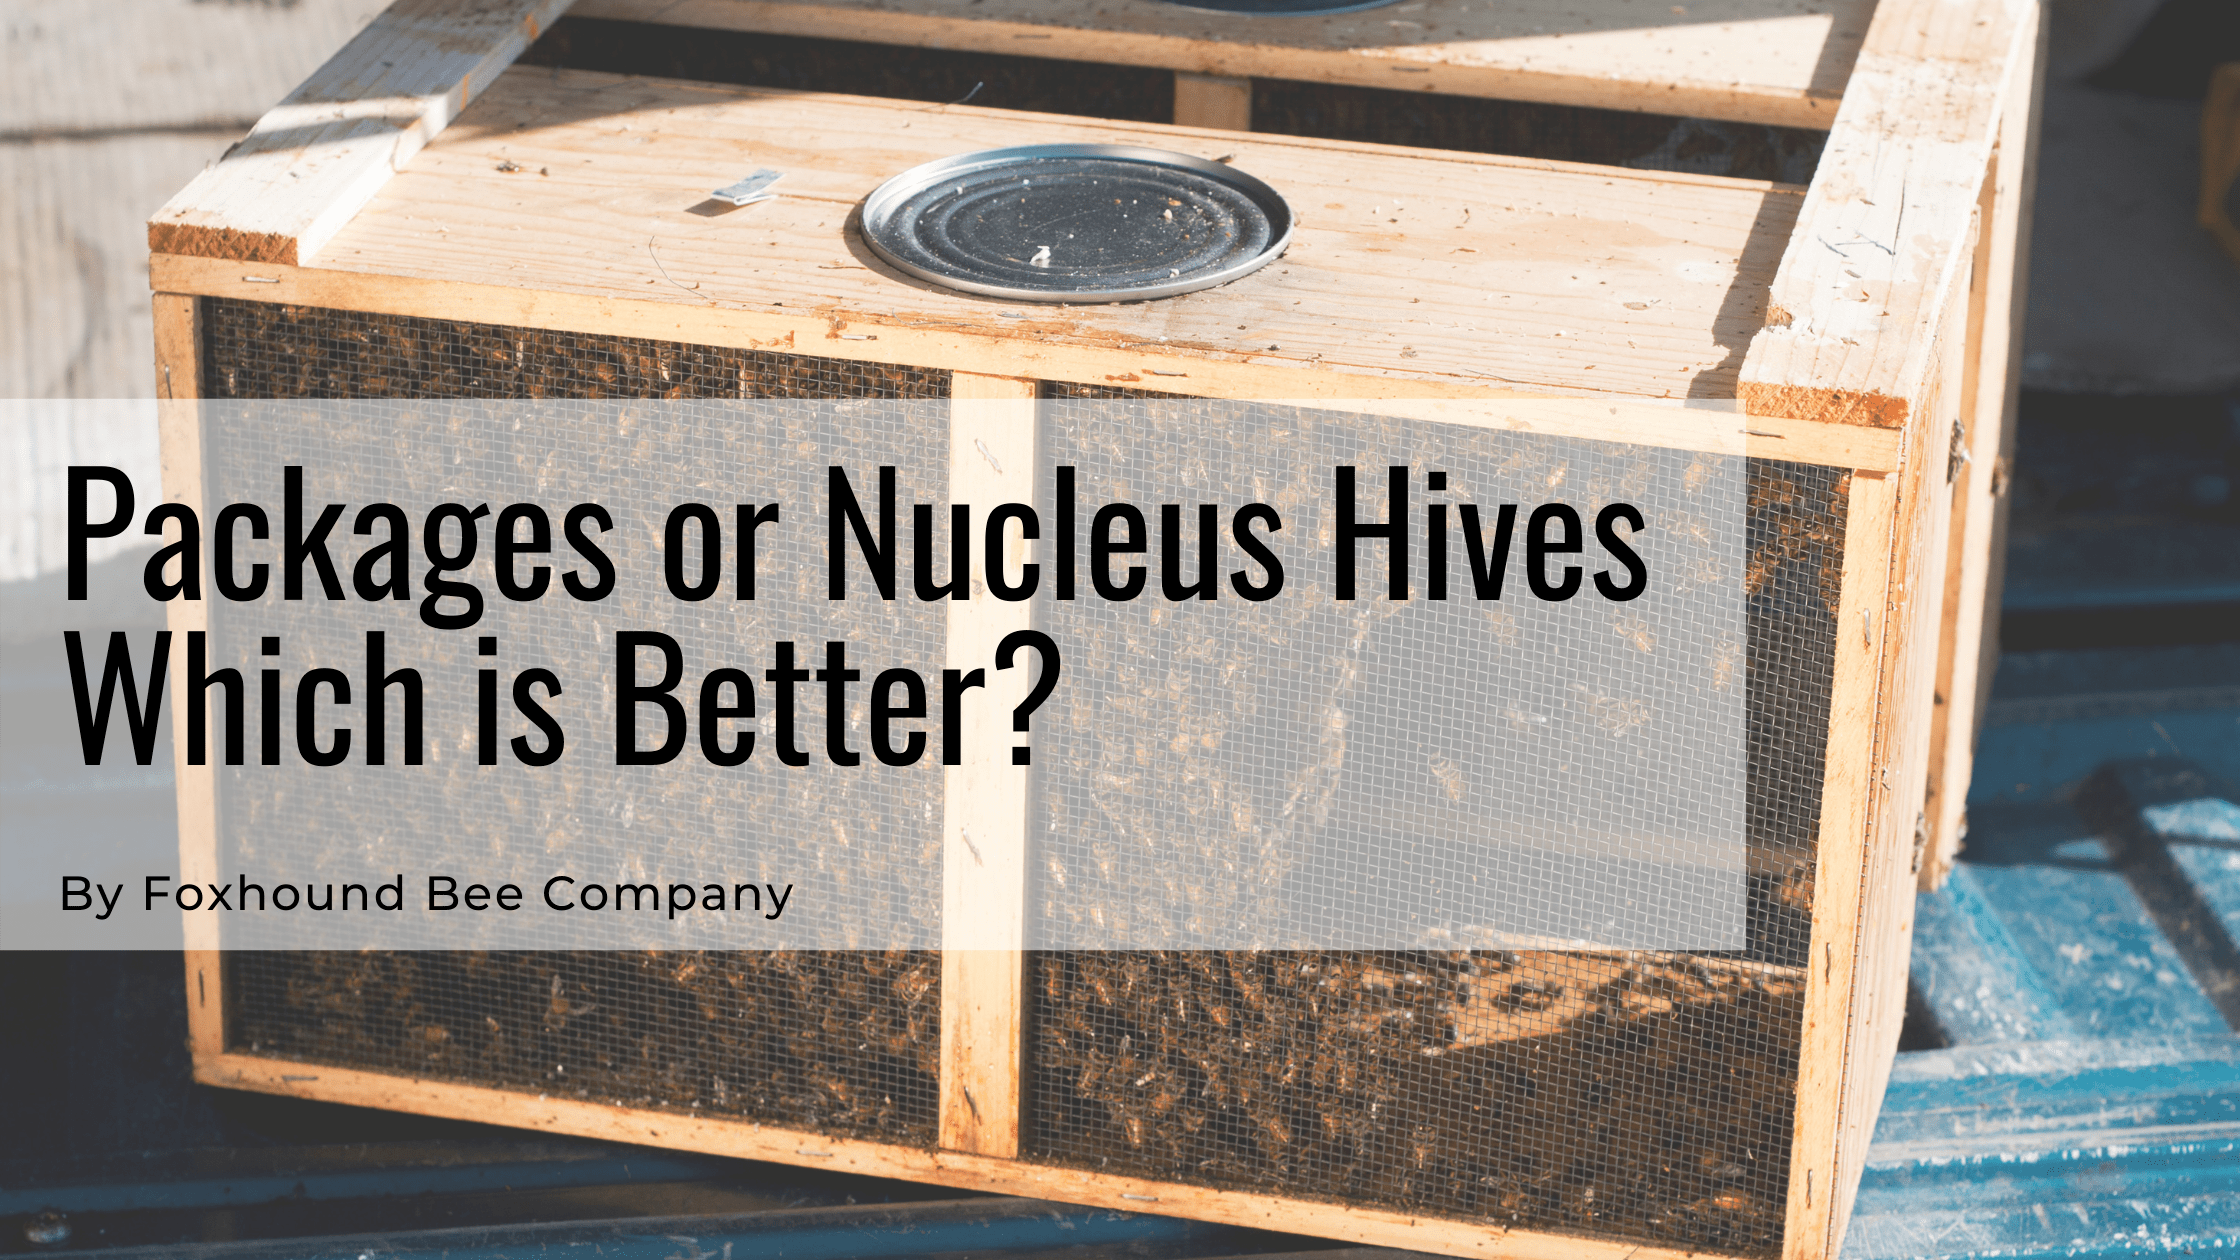 Packages or Nucleus Hives, Which is Better? Foxhound Bee Co